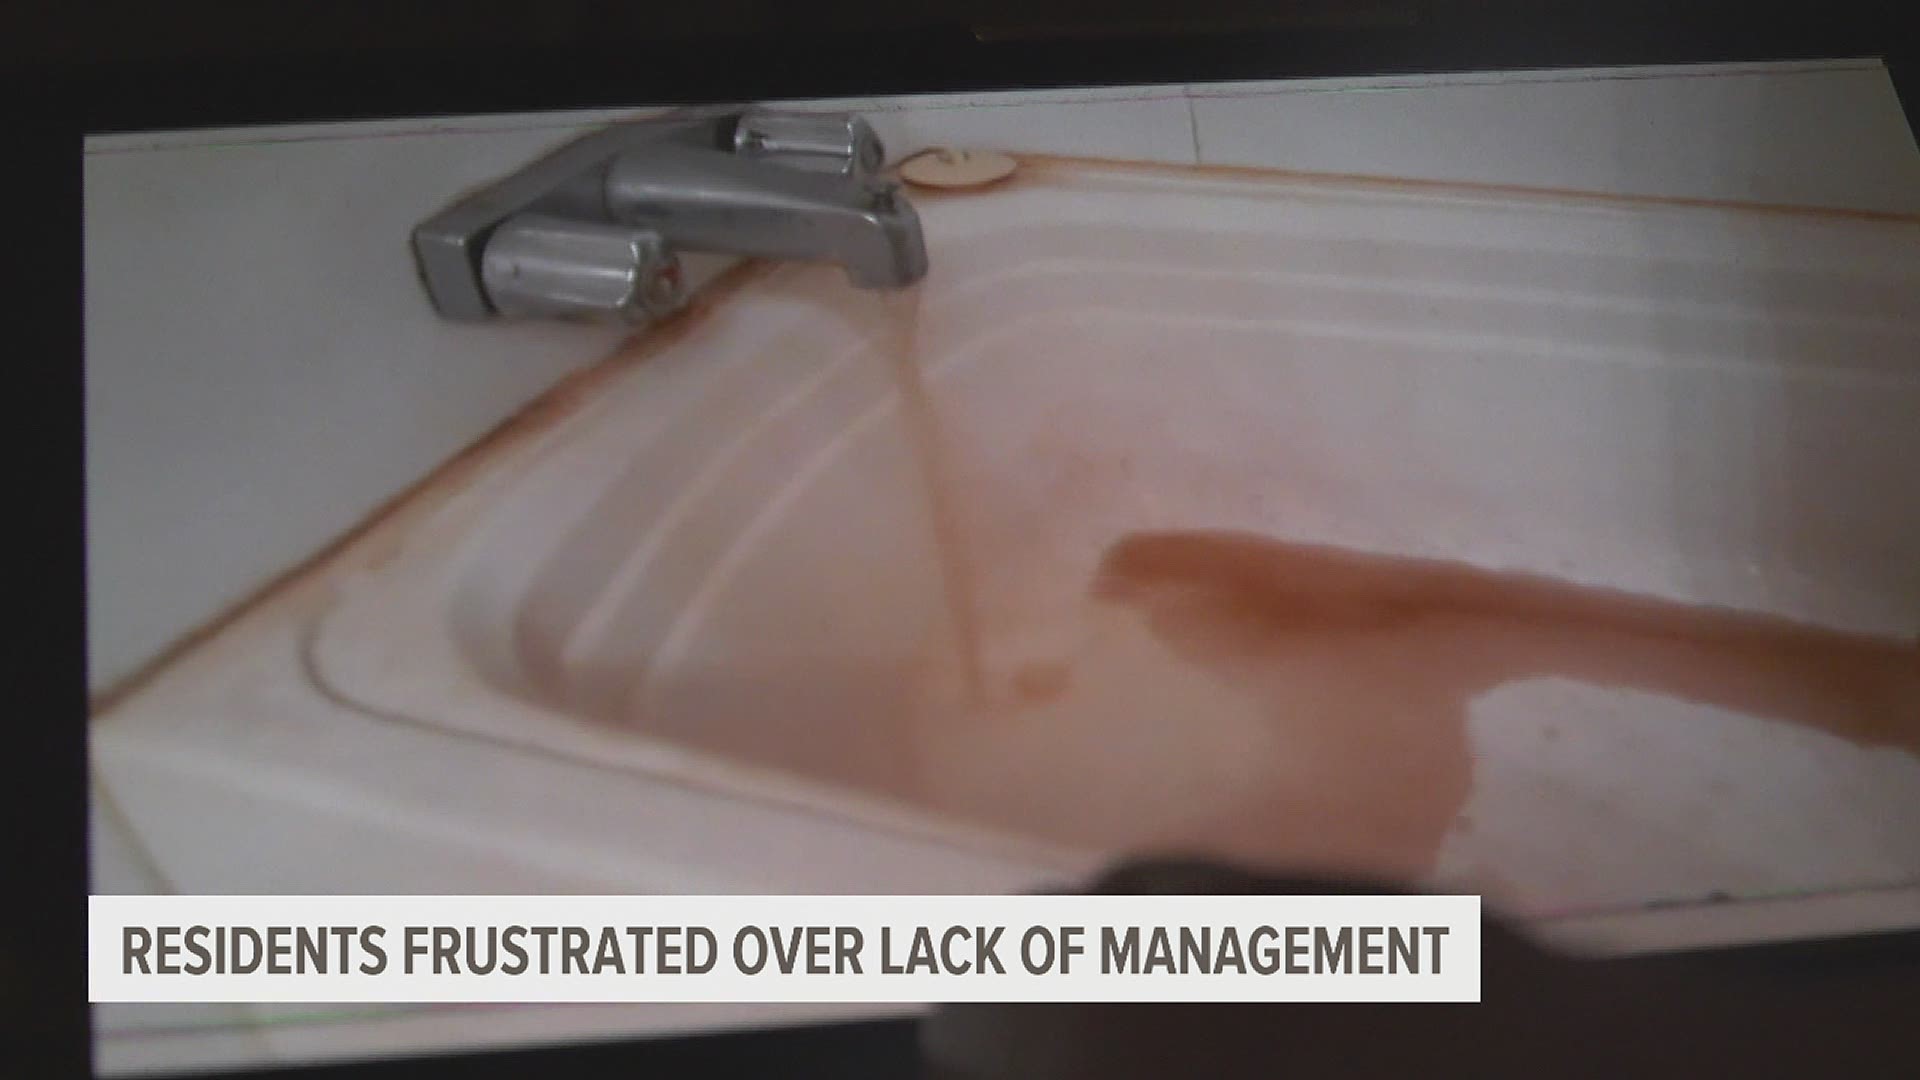 “There has been no road maintenance done. The water is absolutely horrible.”